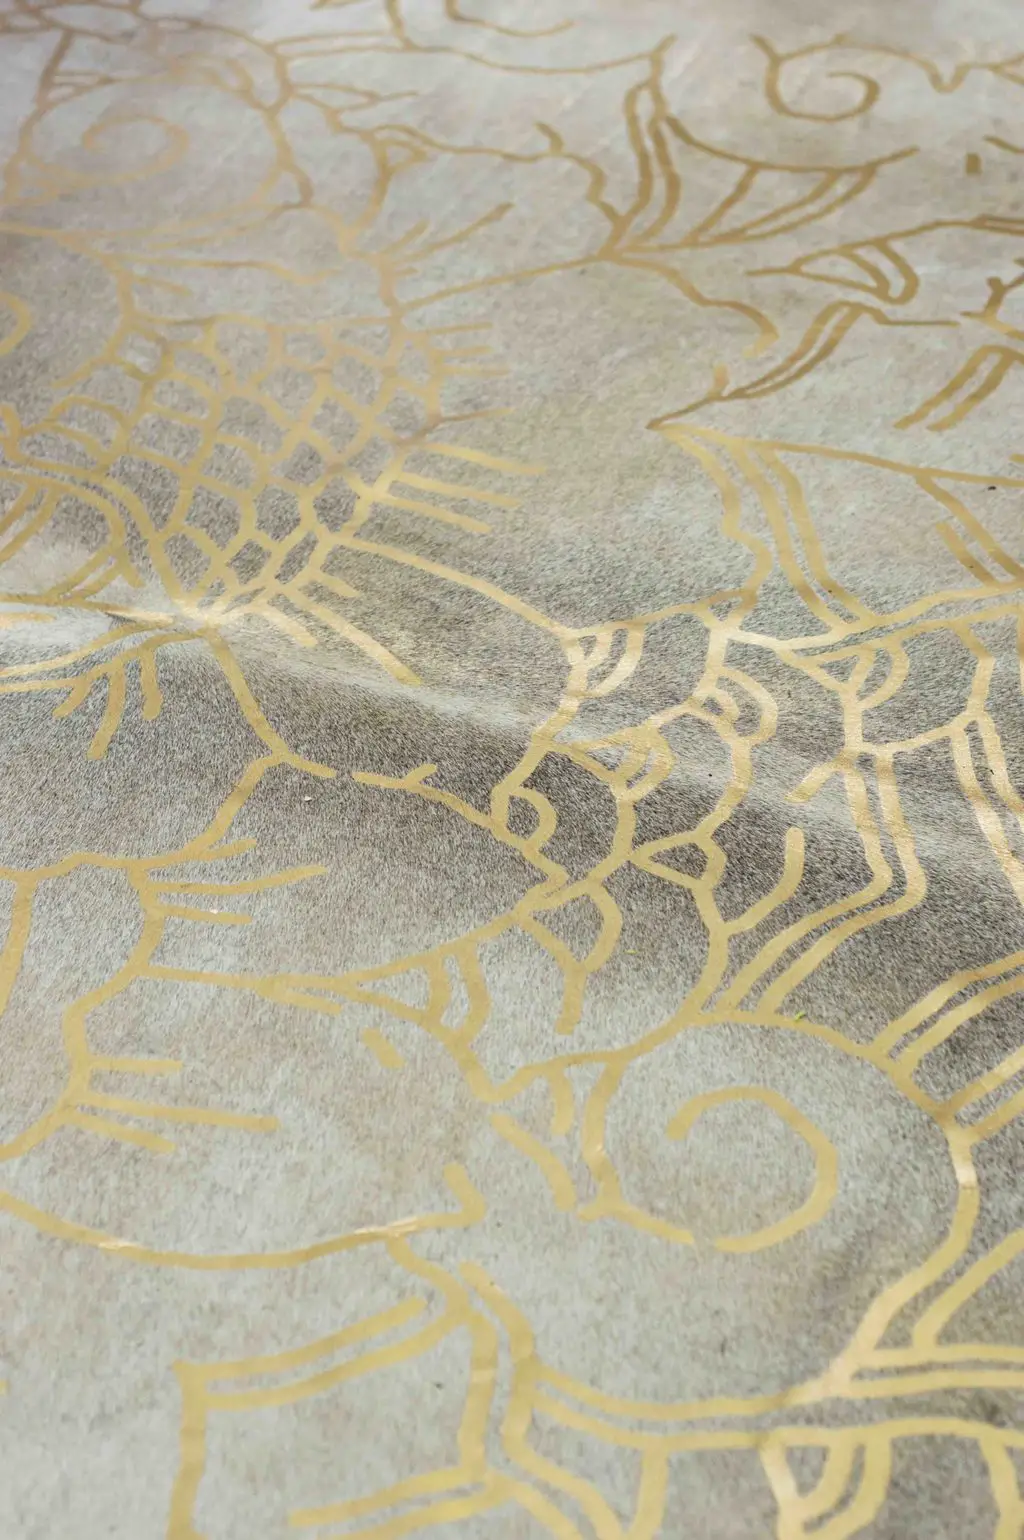 Hide rug with gold pattern on Thou Swell @thouswellblog